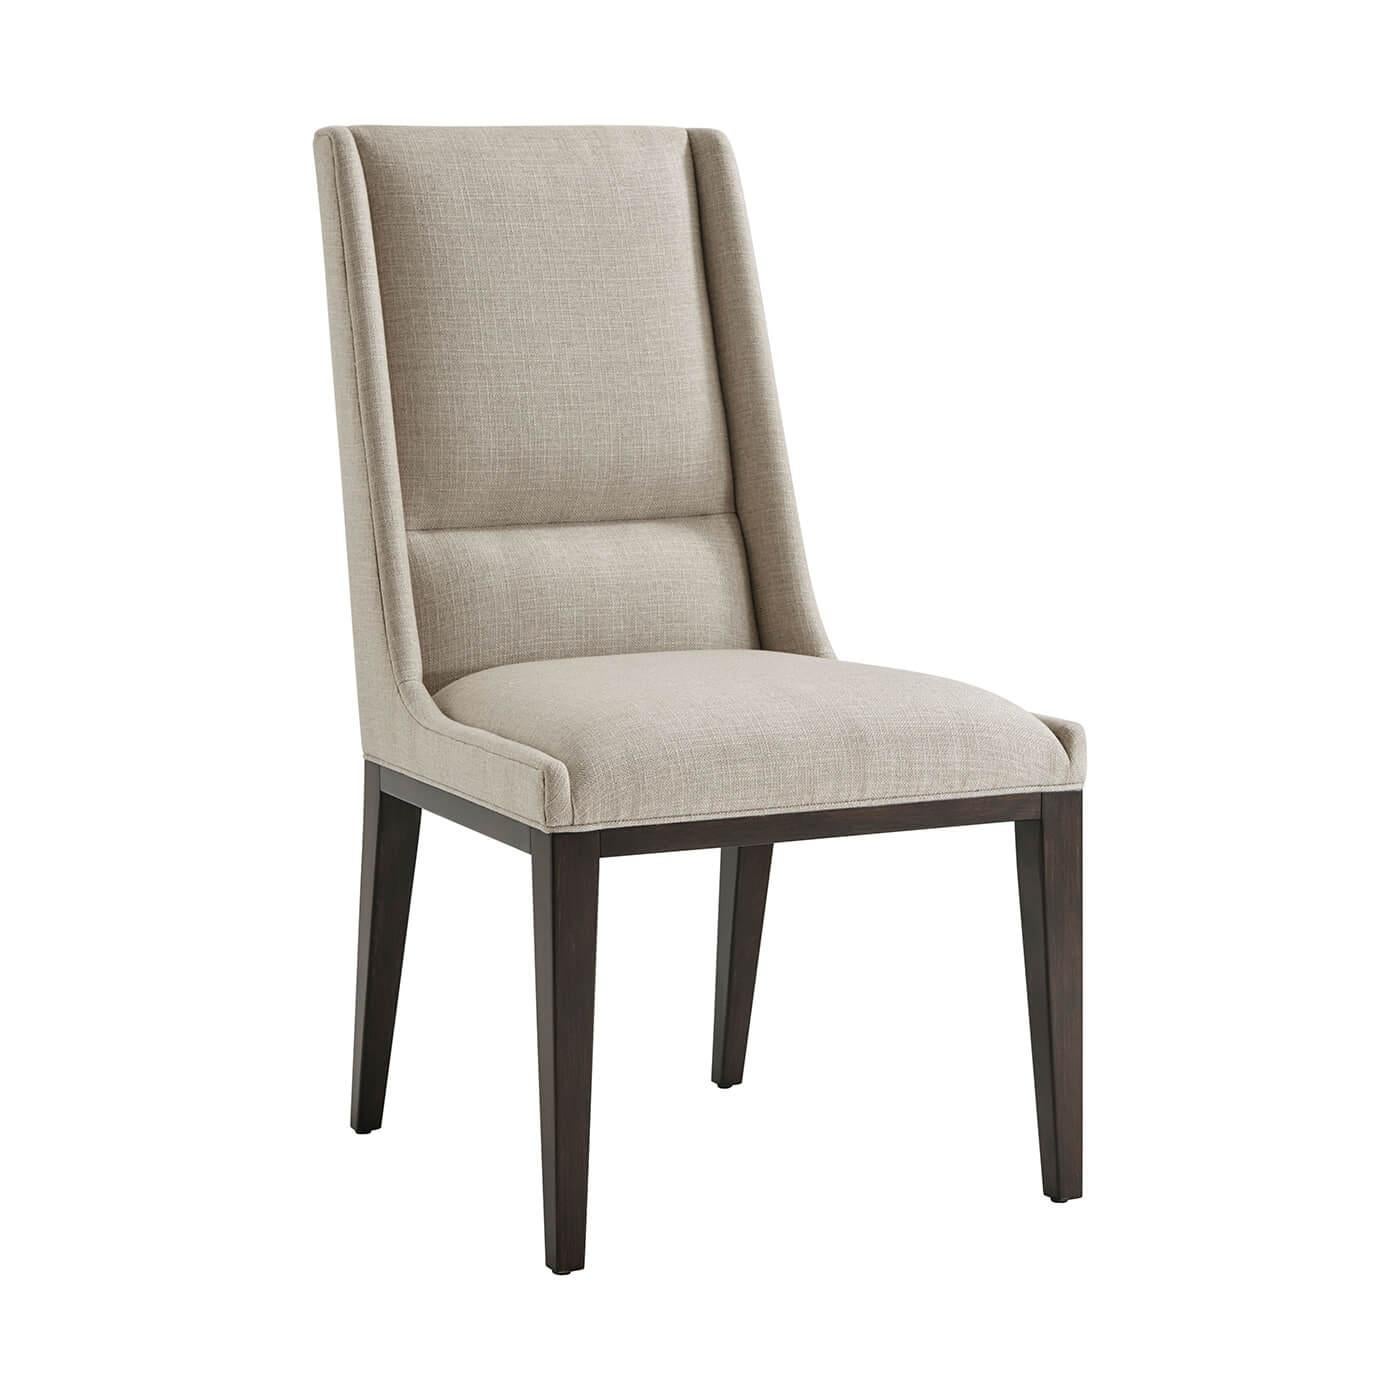 Vietnamese Mid Century Style Upholstered Dining Chair For Sale